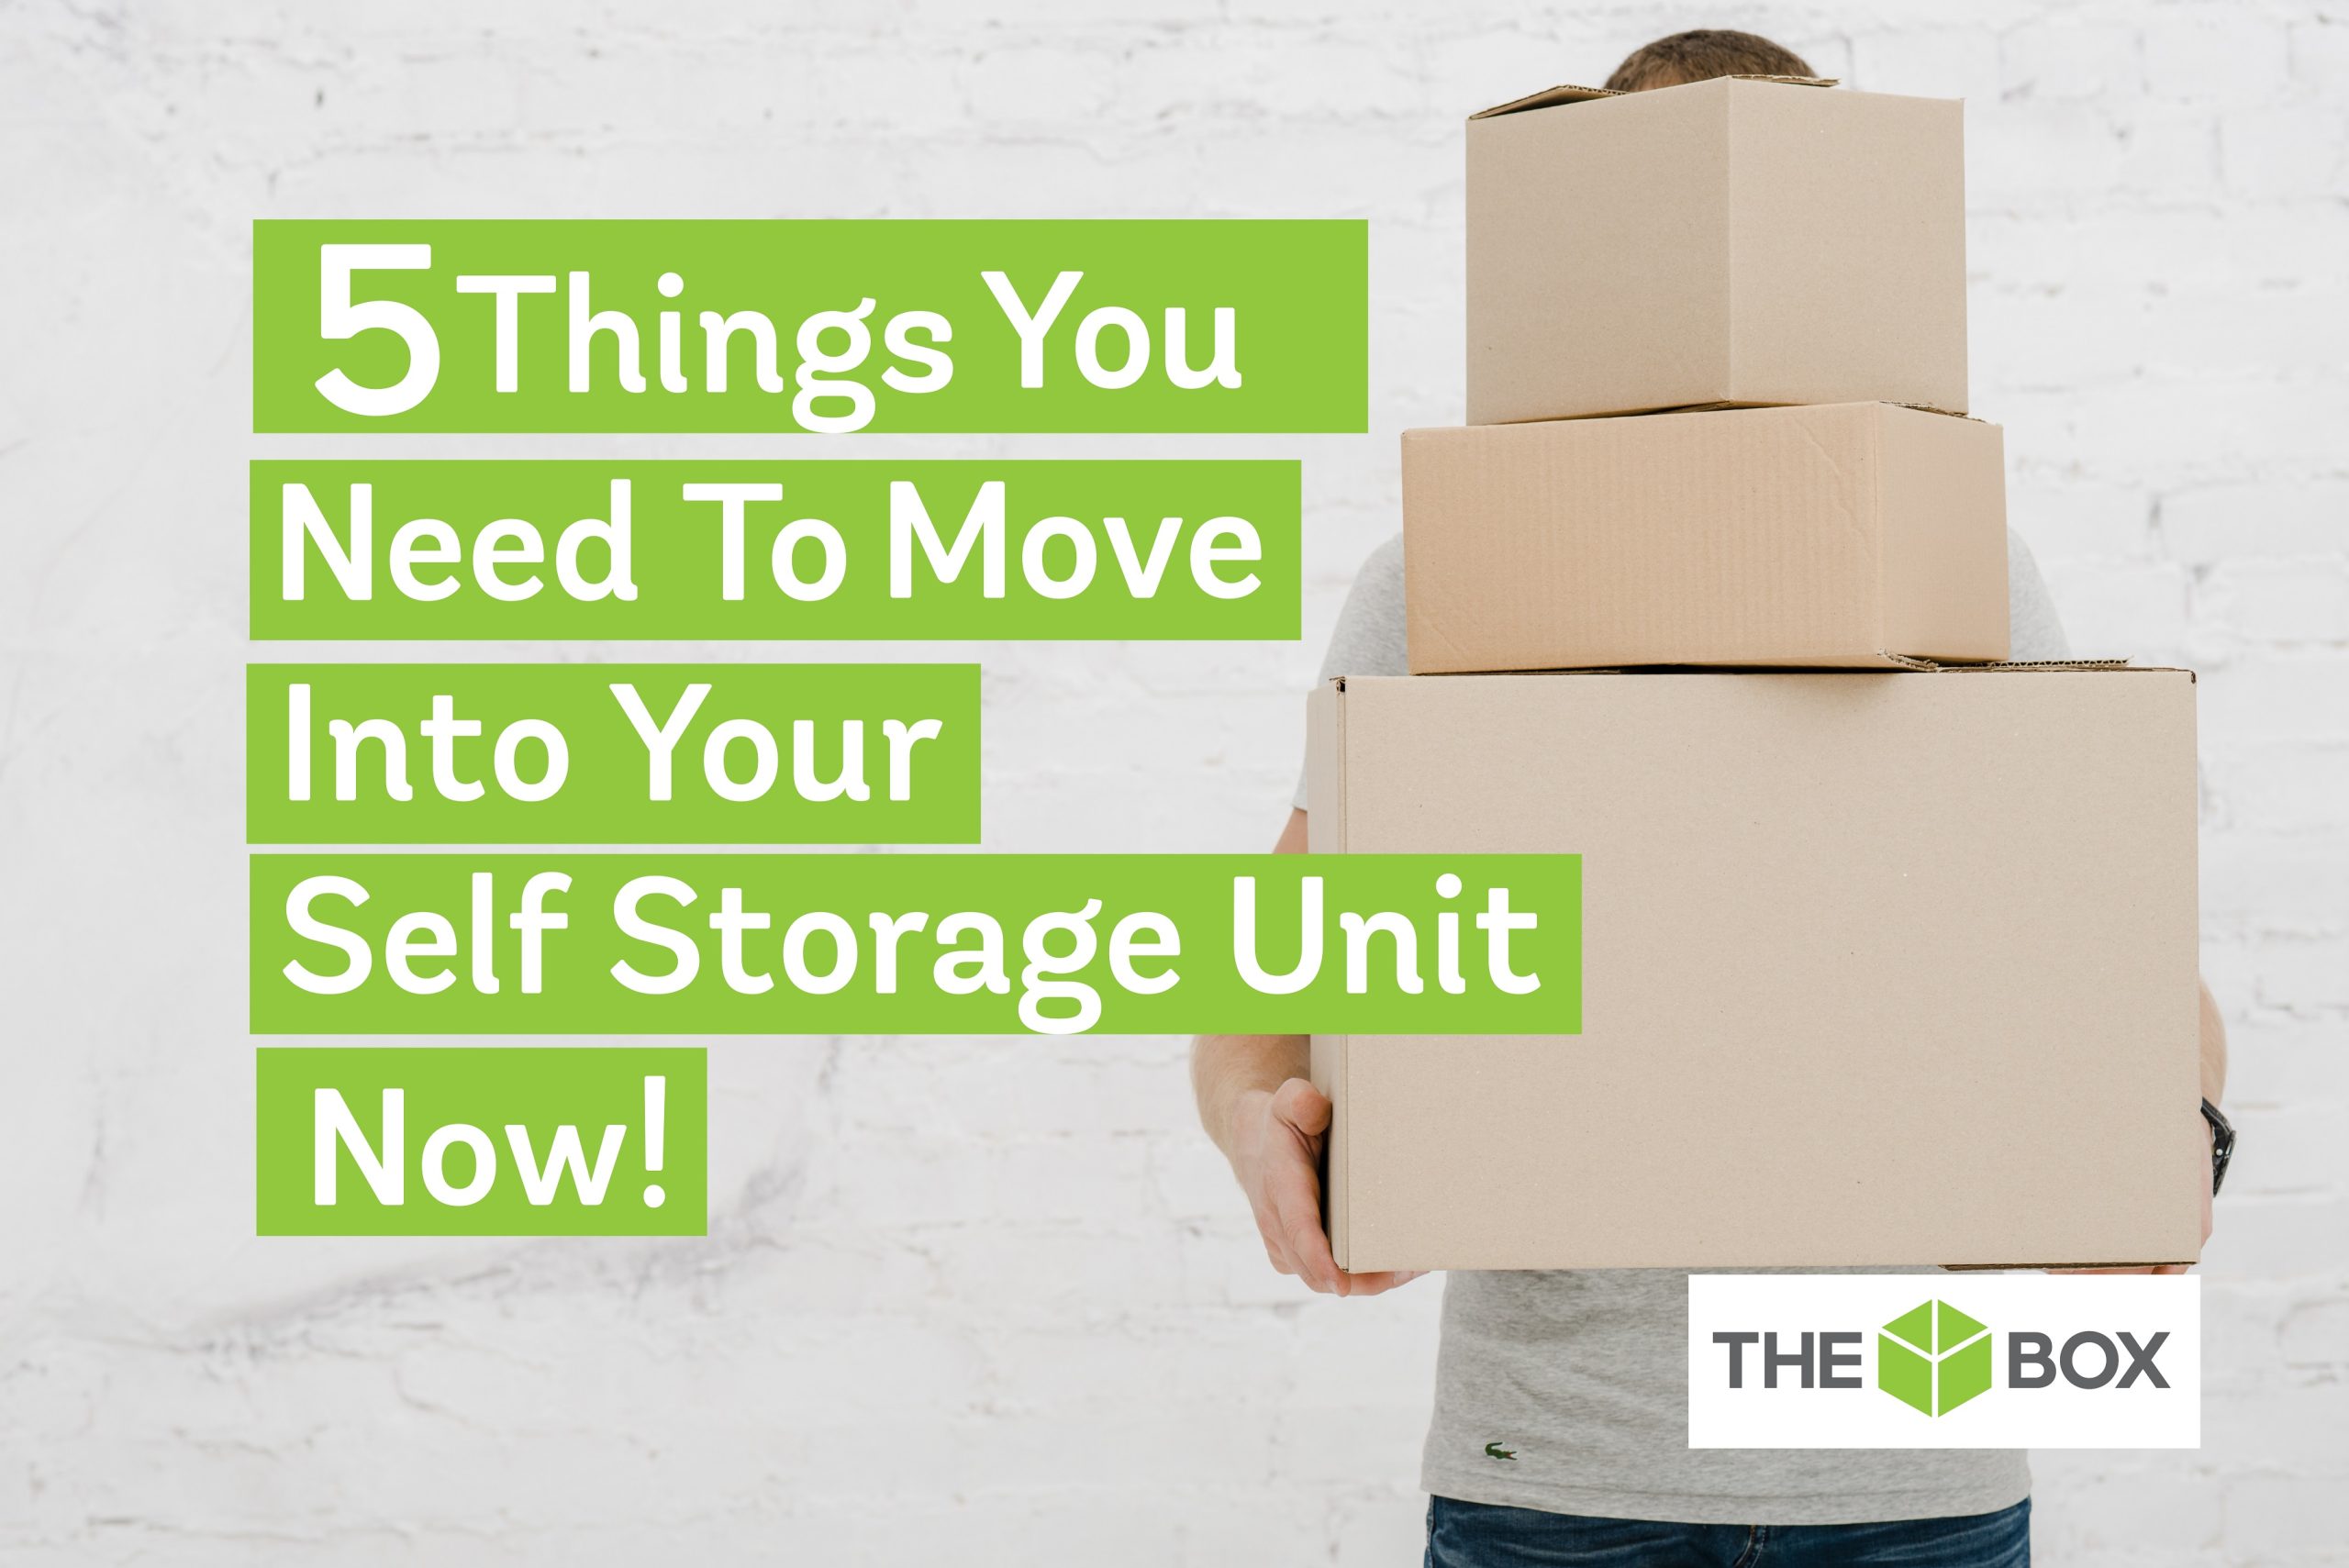 5 Things You Need To Move Into Your Self Storage Unit Now! Image